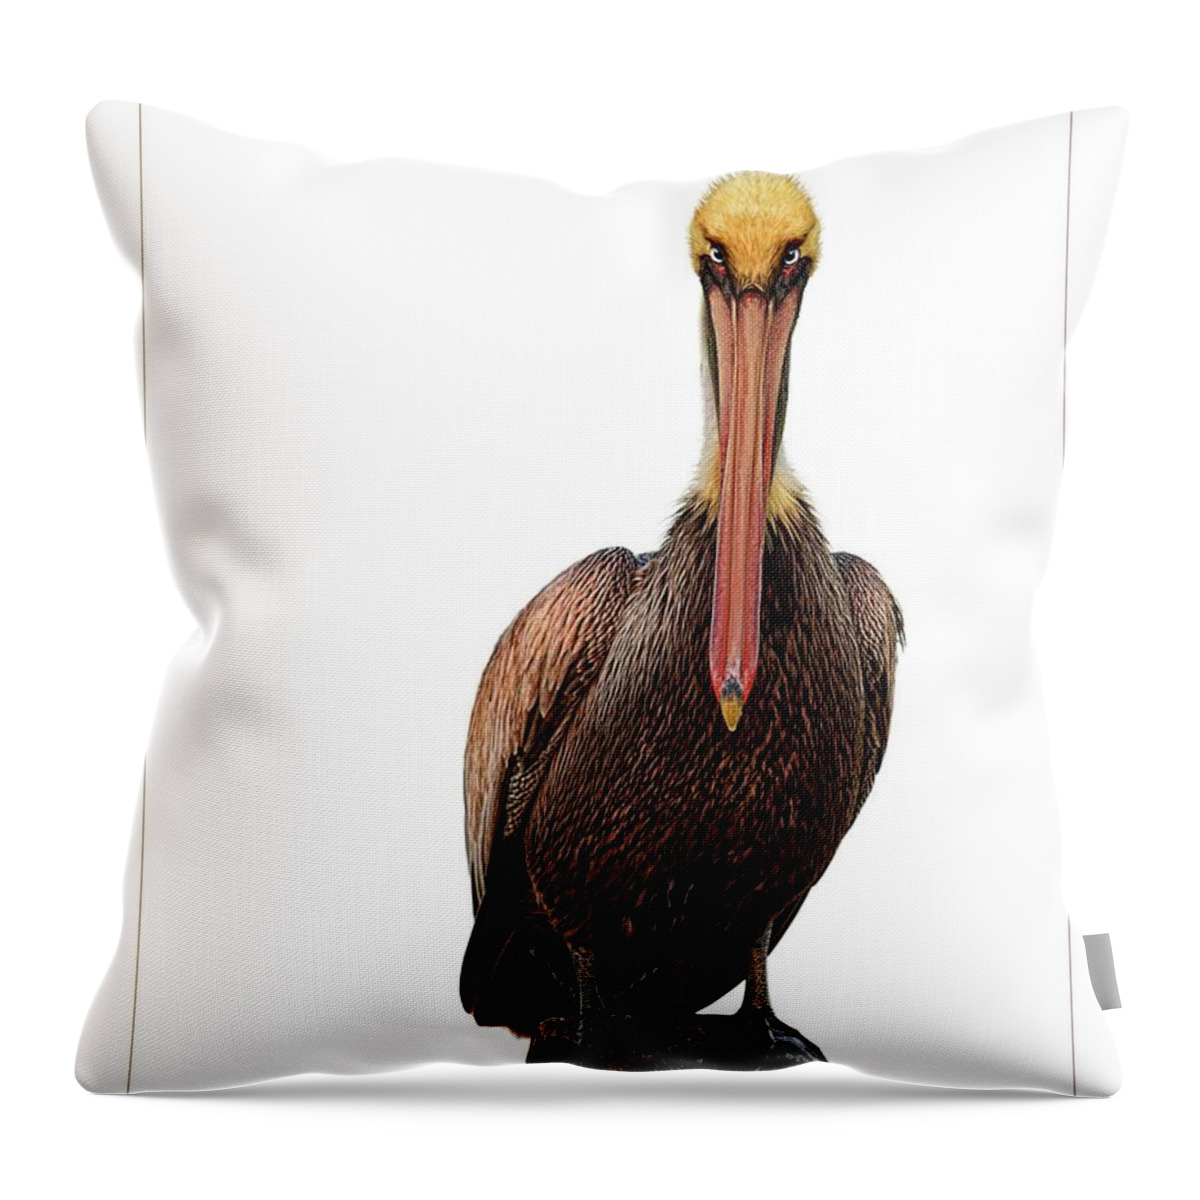 Pelican Throw Pillow featuring the digital art Disapproving Pelican by Brad Barton